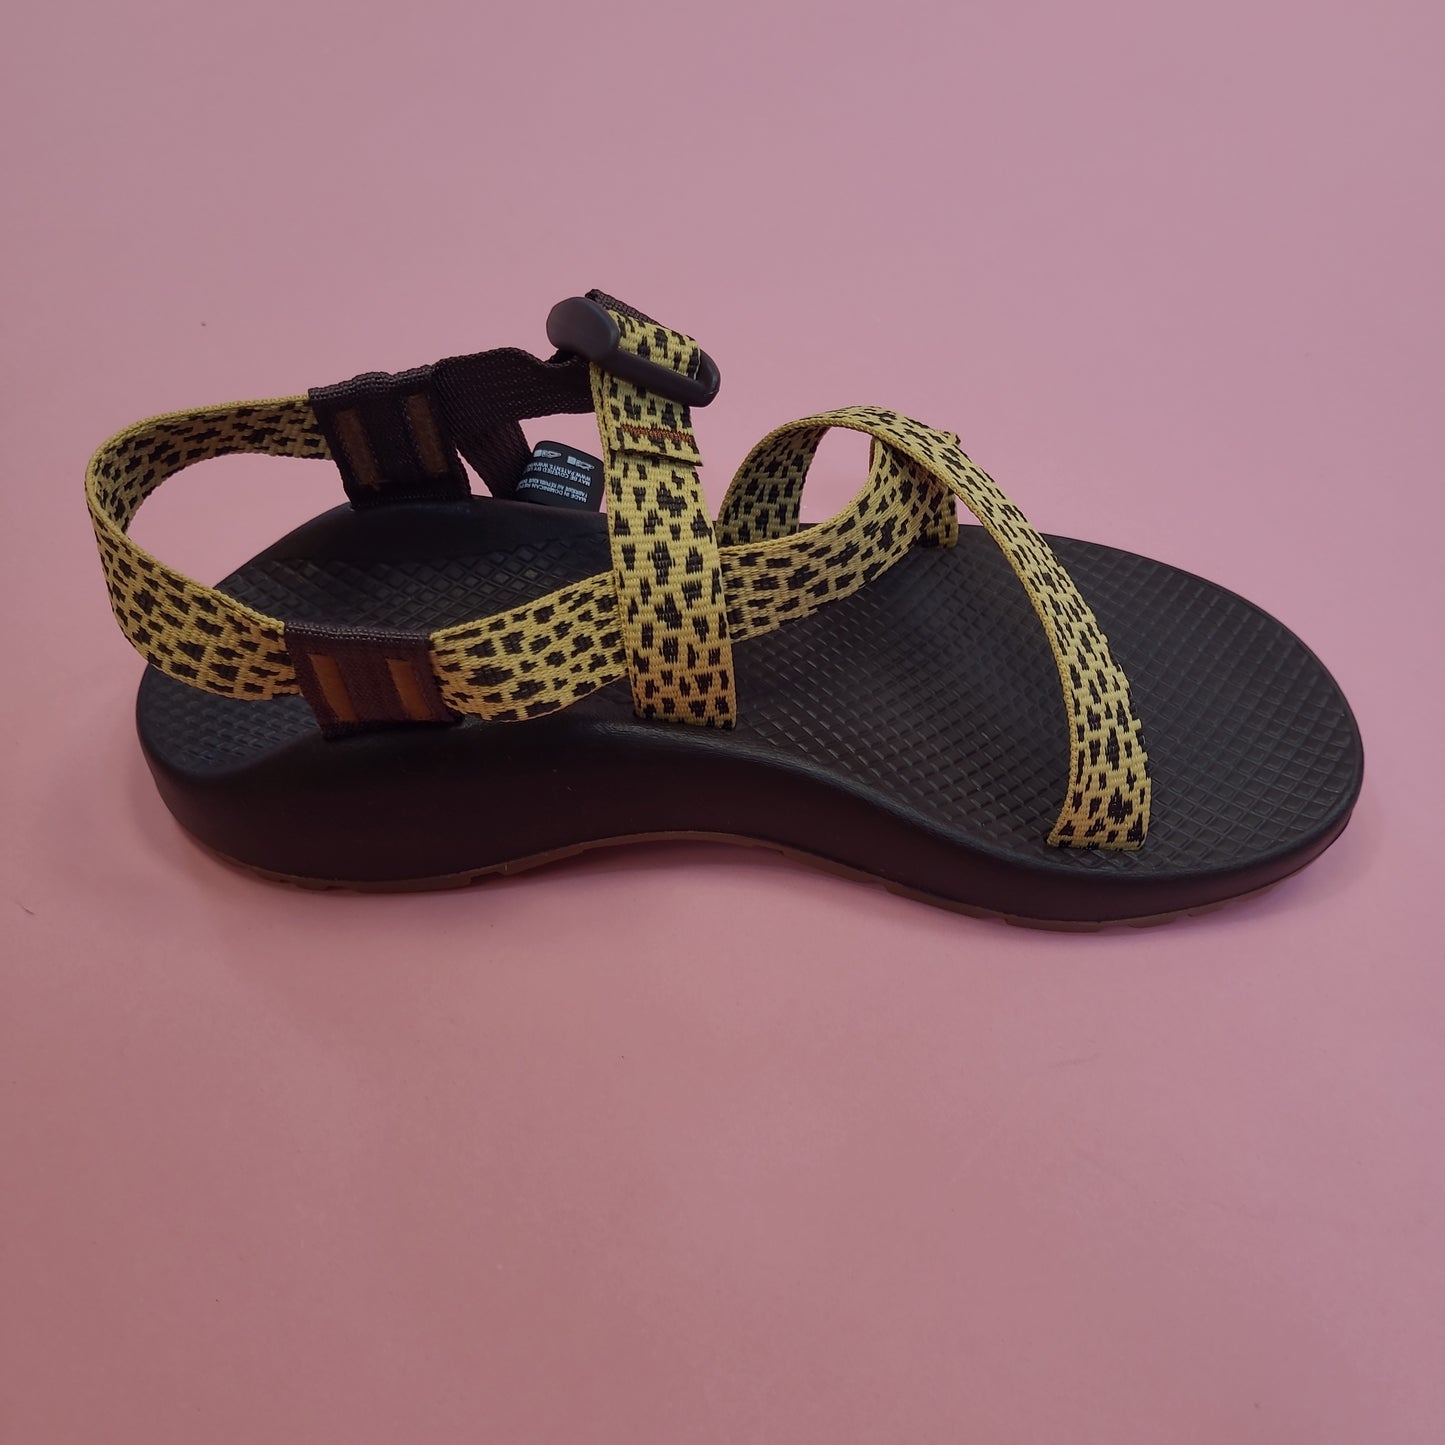 Classic Dotted Ochre Chaco Sandal